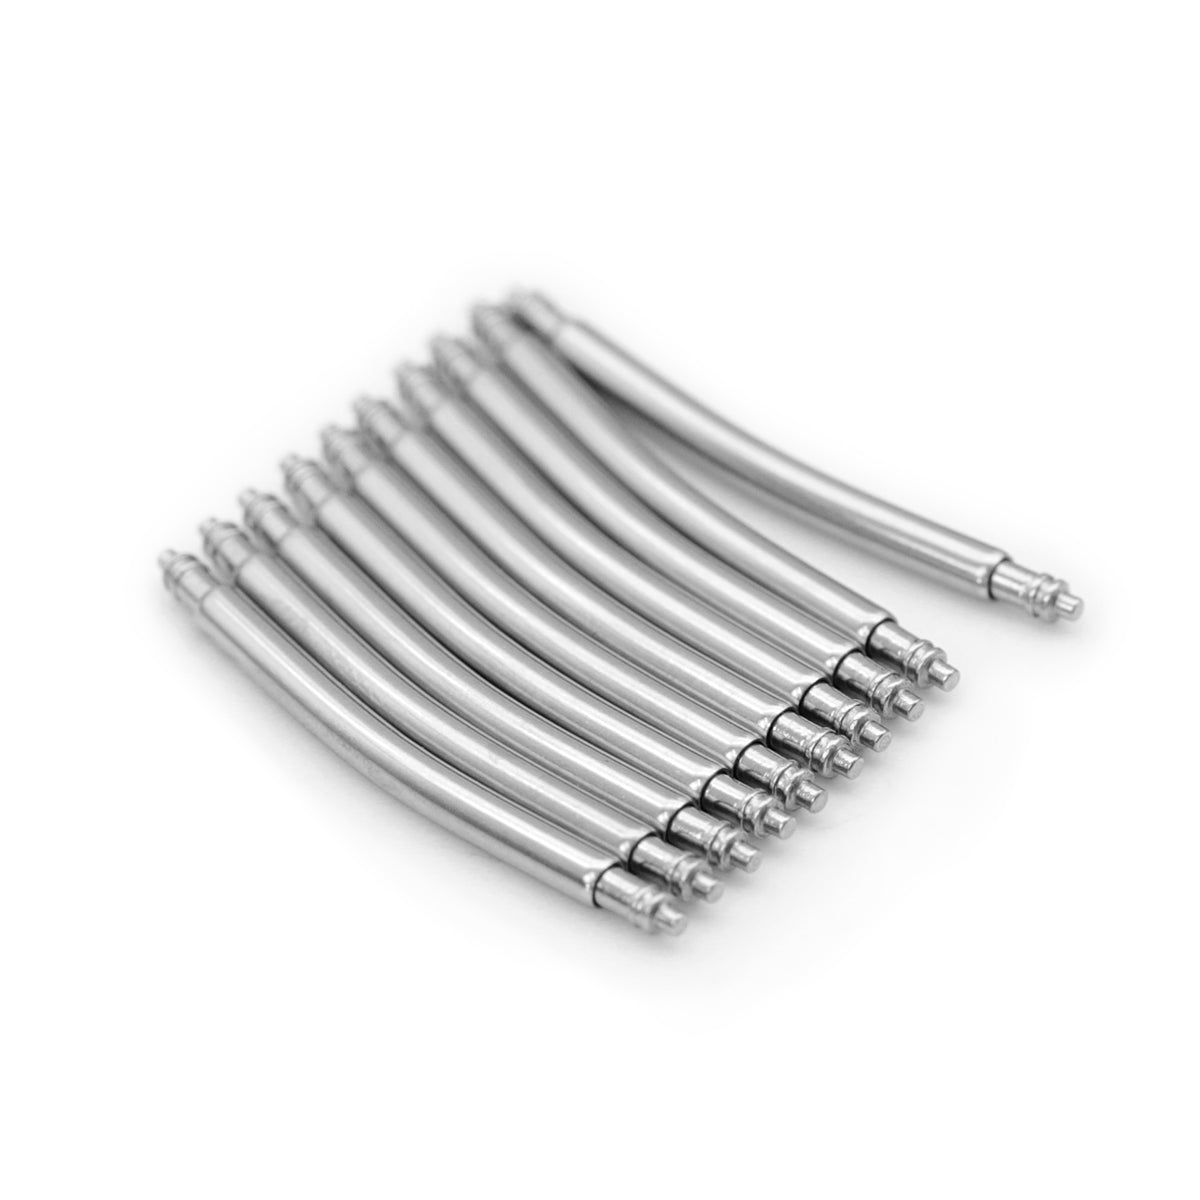 18, 19, 20, 21, 22, 24mm Curved Spring Bars Double Shoulder 1.78mm Dia. (pack of 20 pieces)